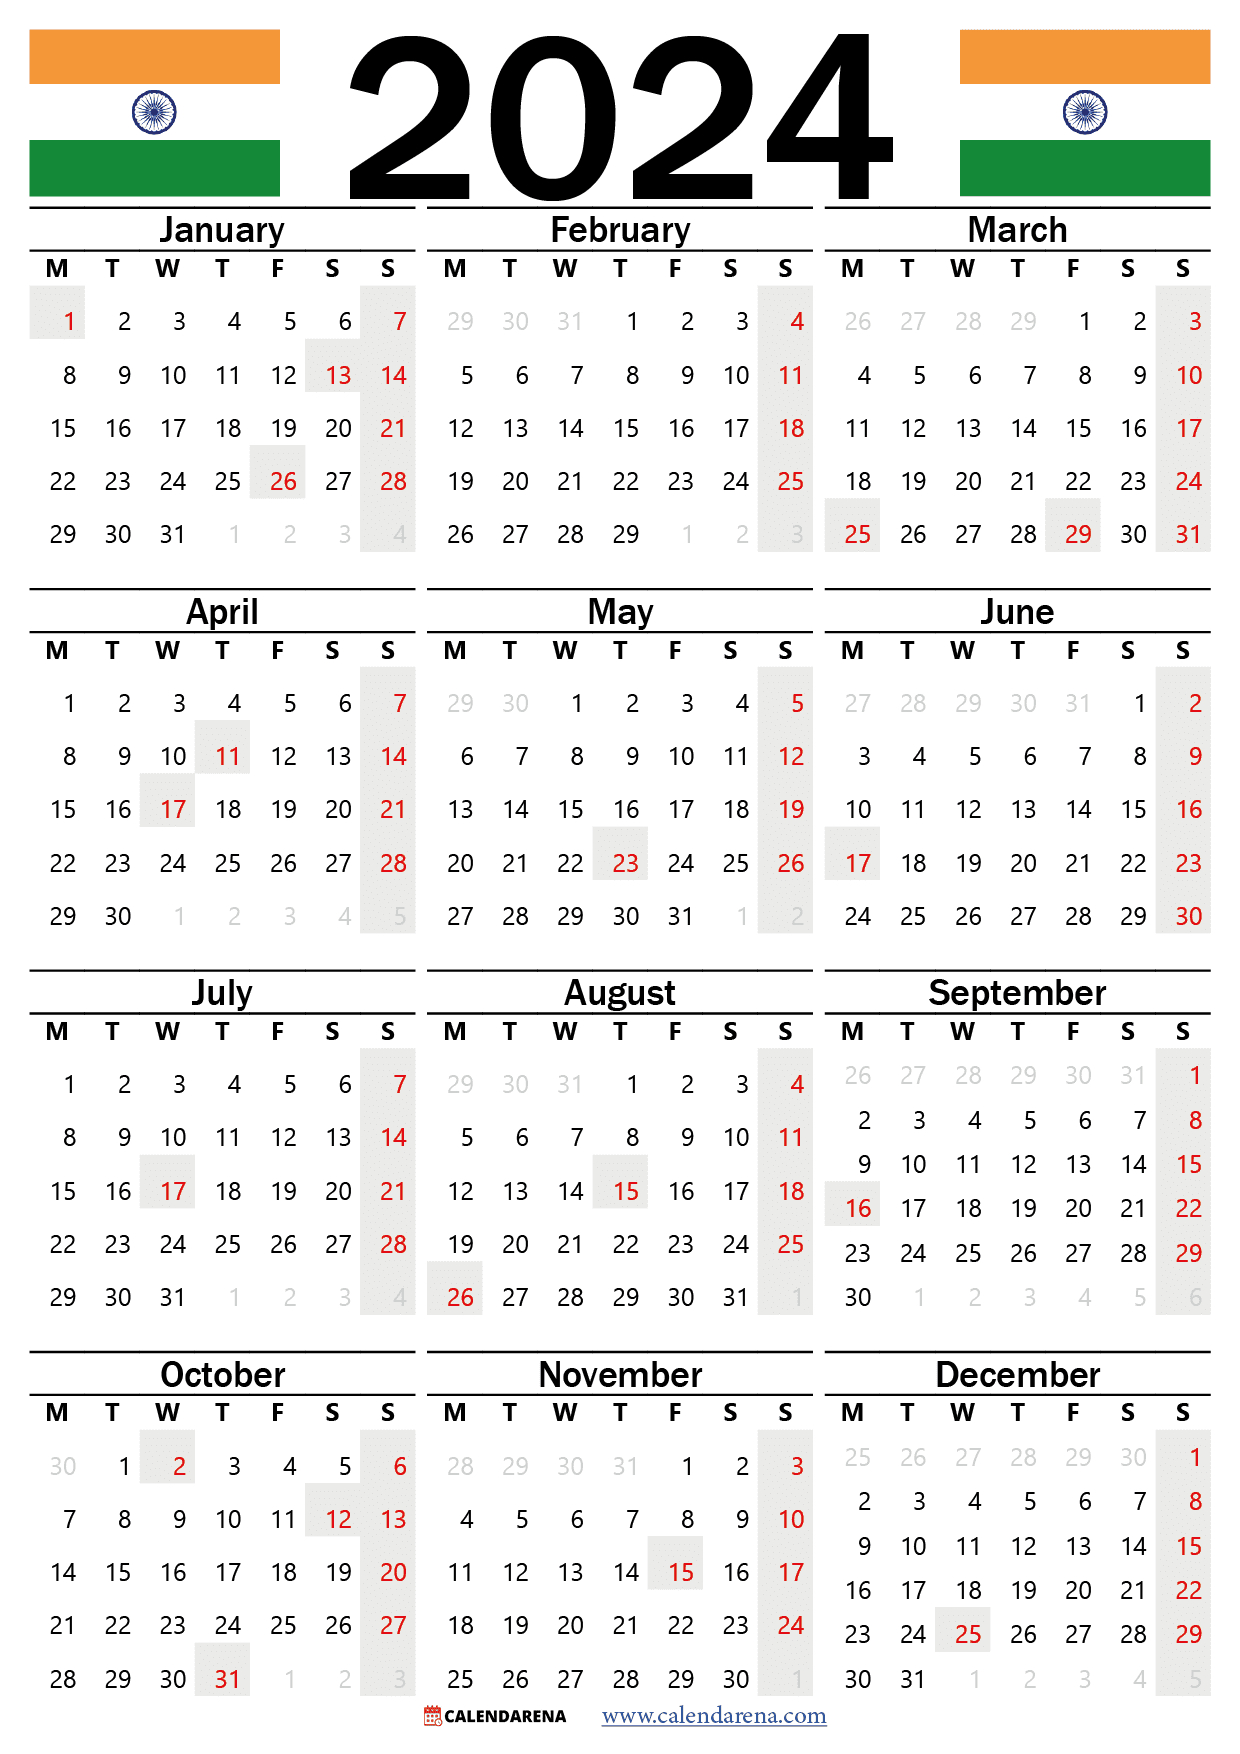 Calendar 2024 India With Holidays And Festivals | Printable Calendar 2024 With Indian Holidays